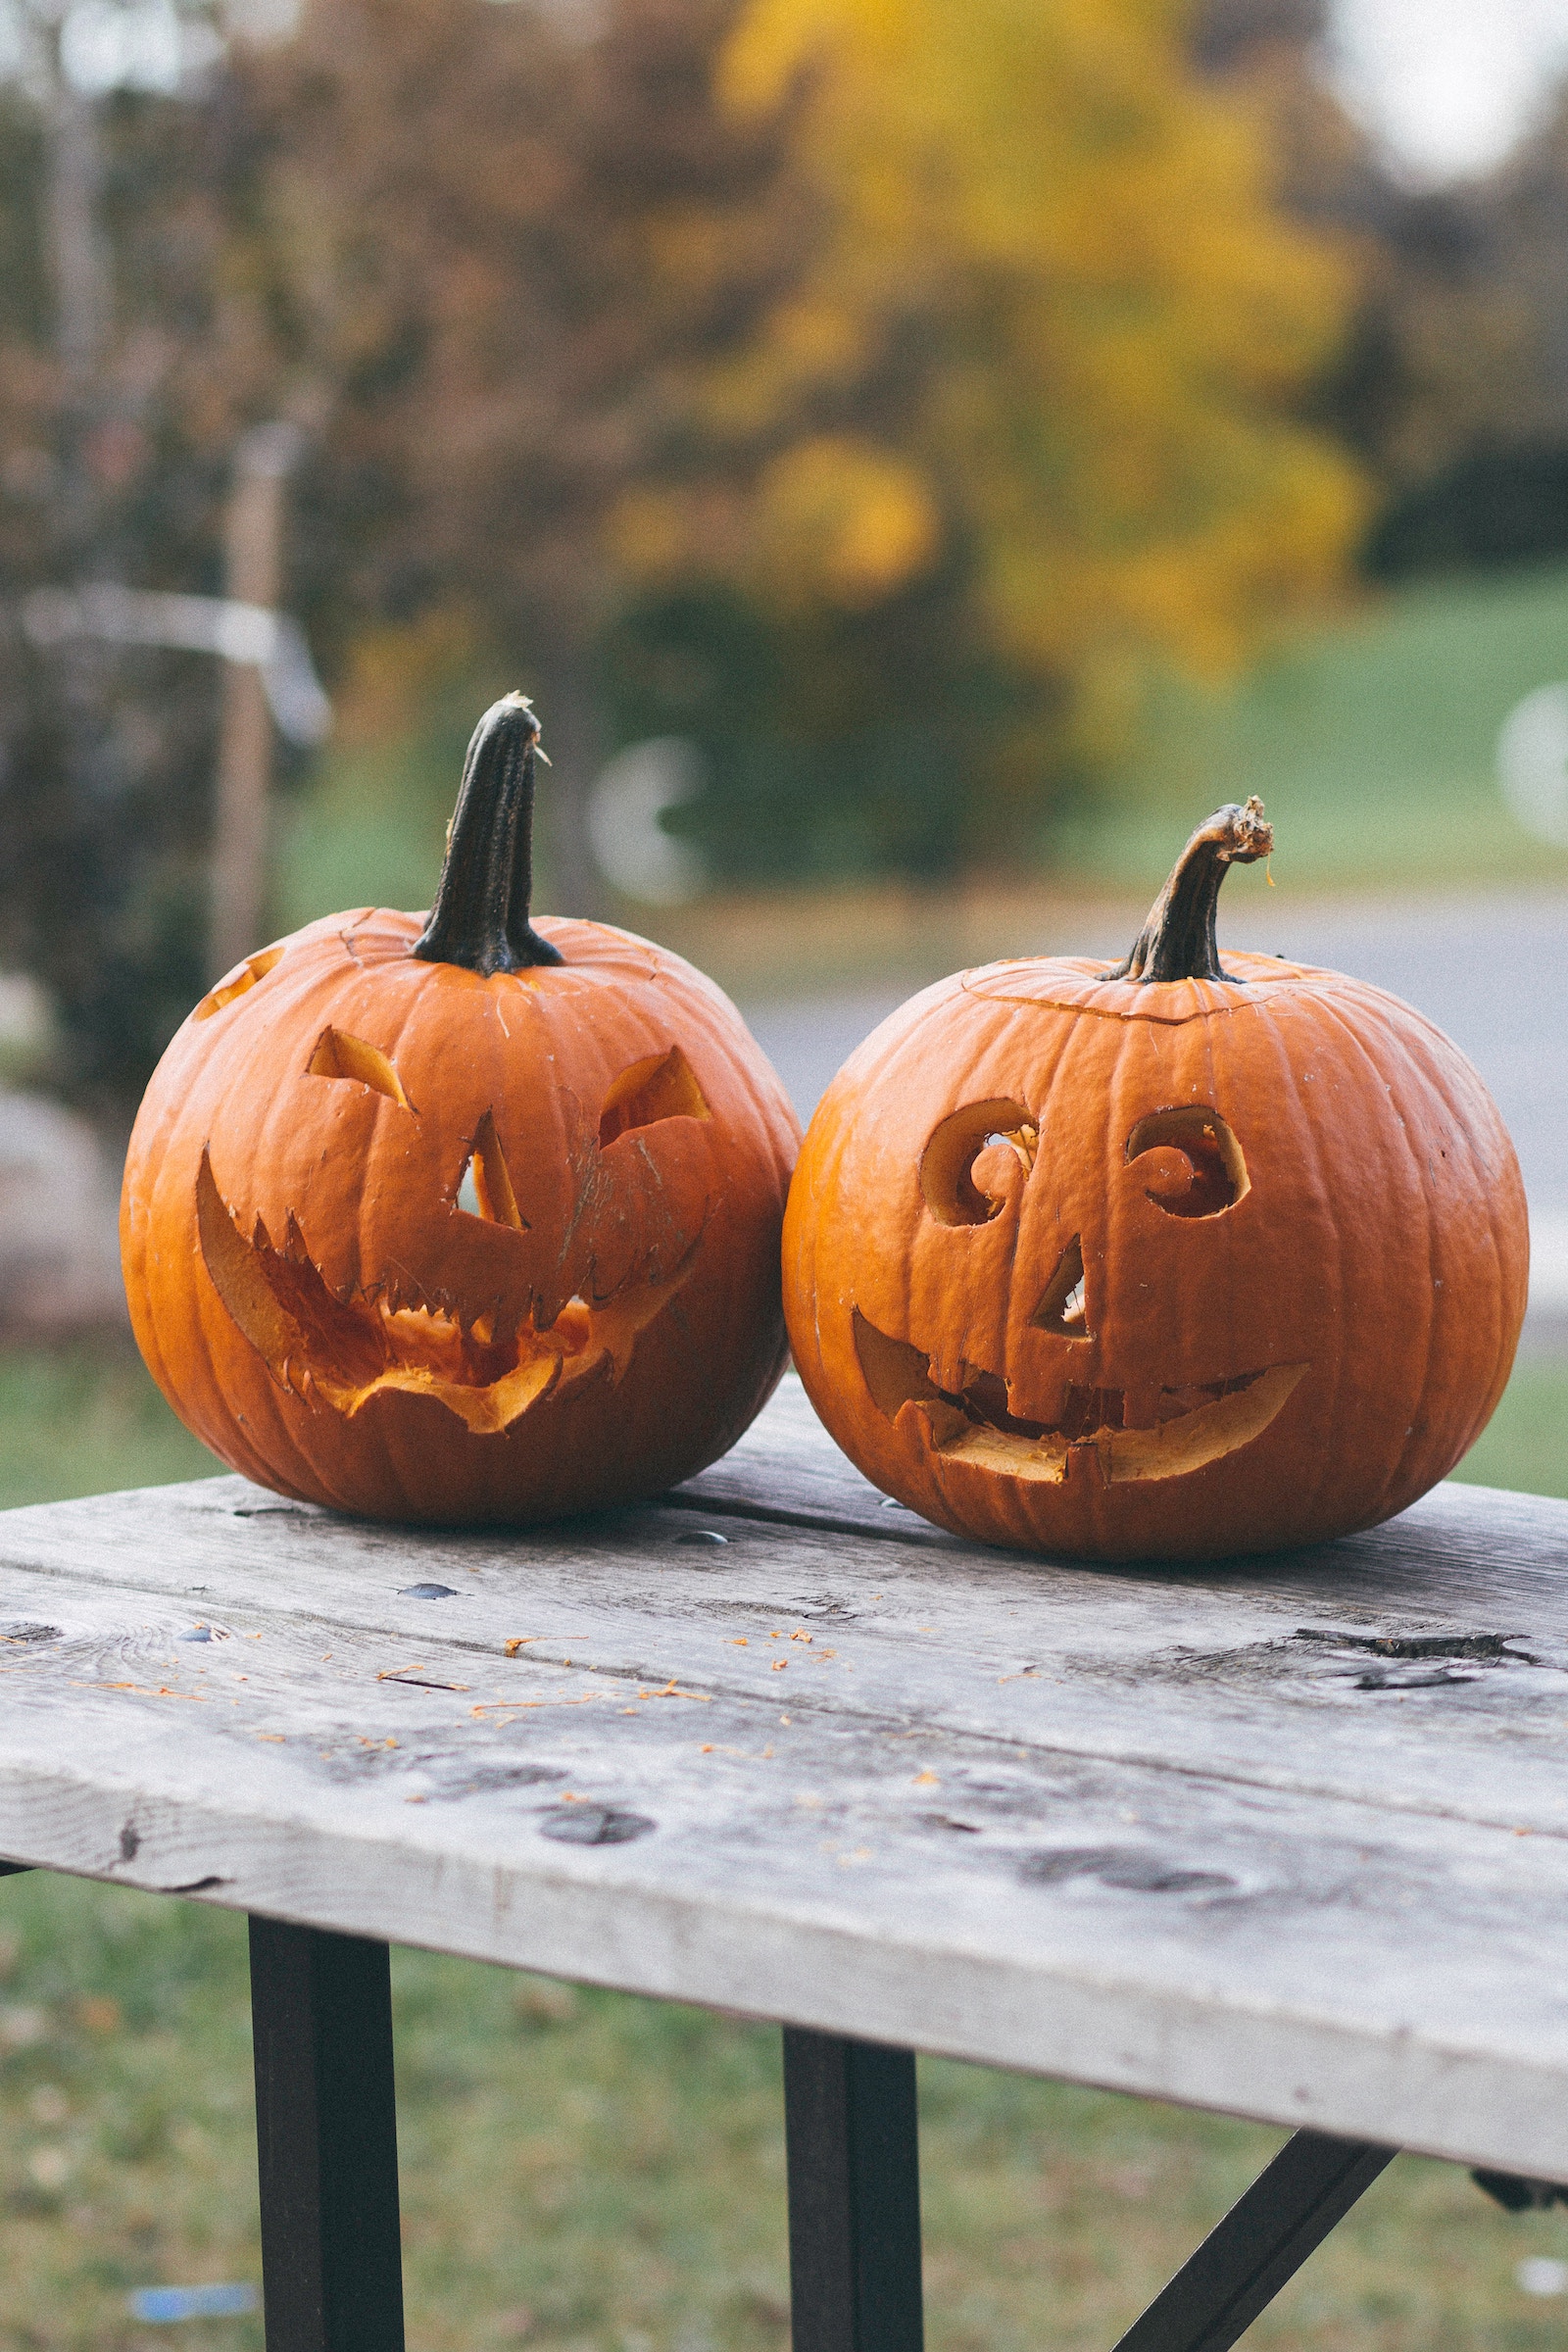 5 Halloween Email Promo Ideas For Retail and Small Business